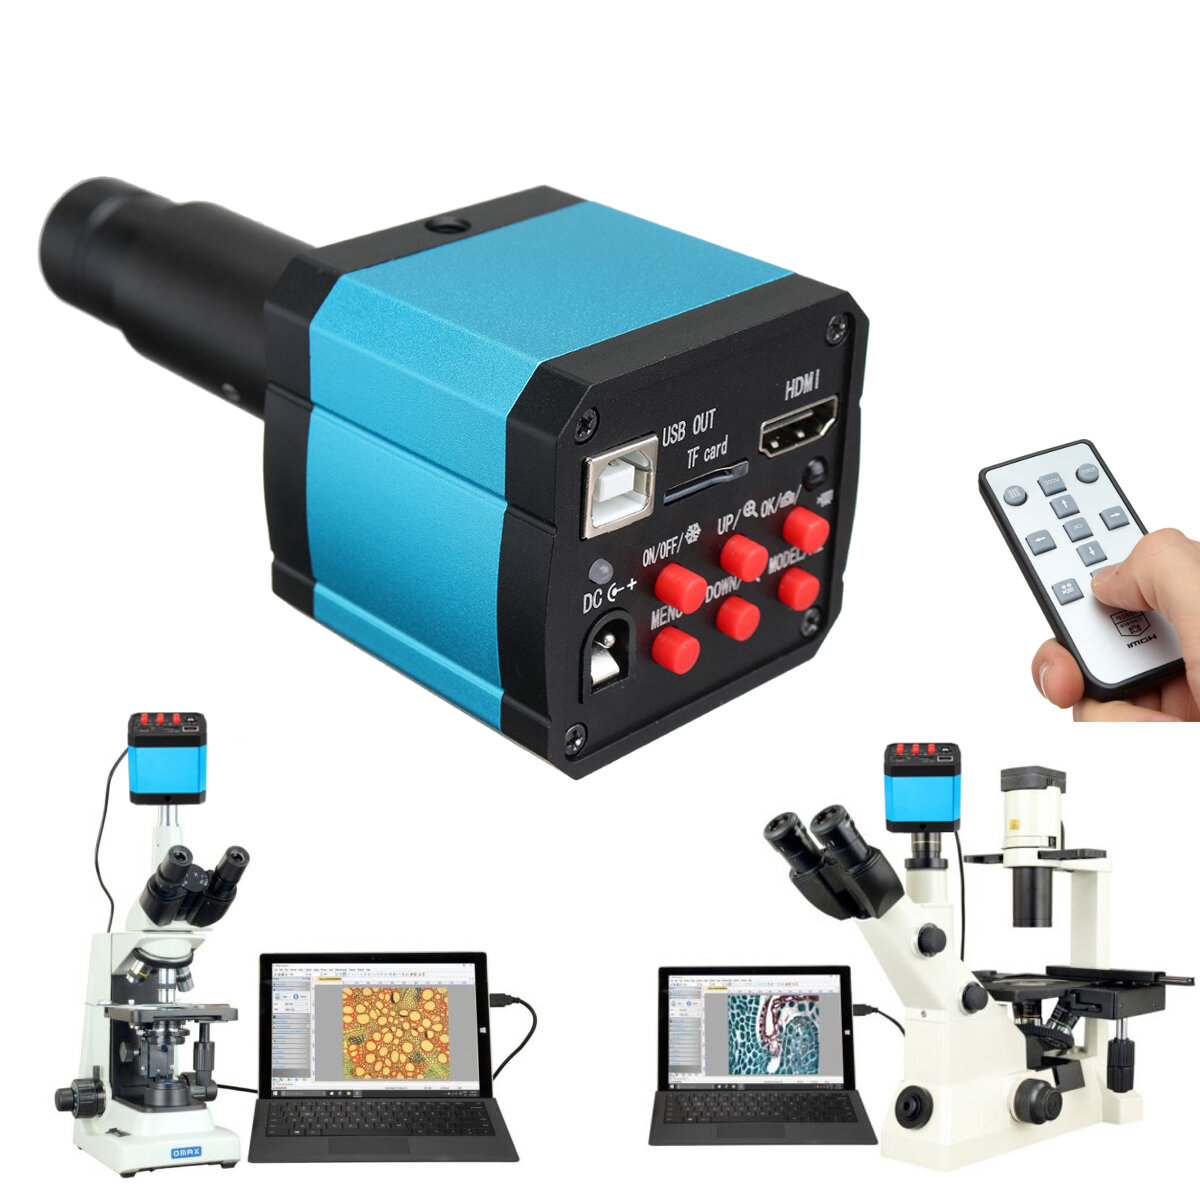 HAYEAR 16MP 1080P 60FPS USB C-mount Digital Industry Video Microscope Camera with HDMI Cable  - buy with discount